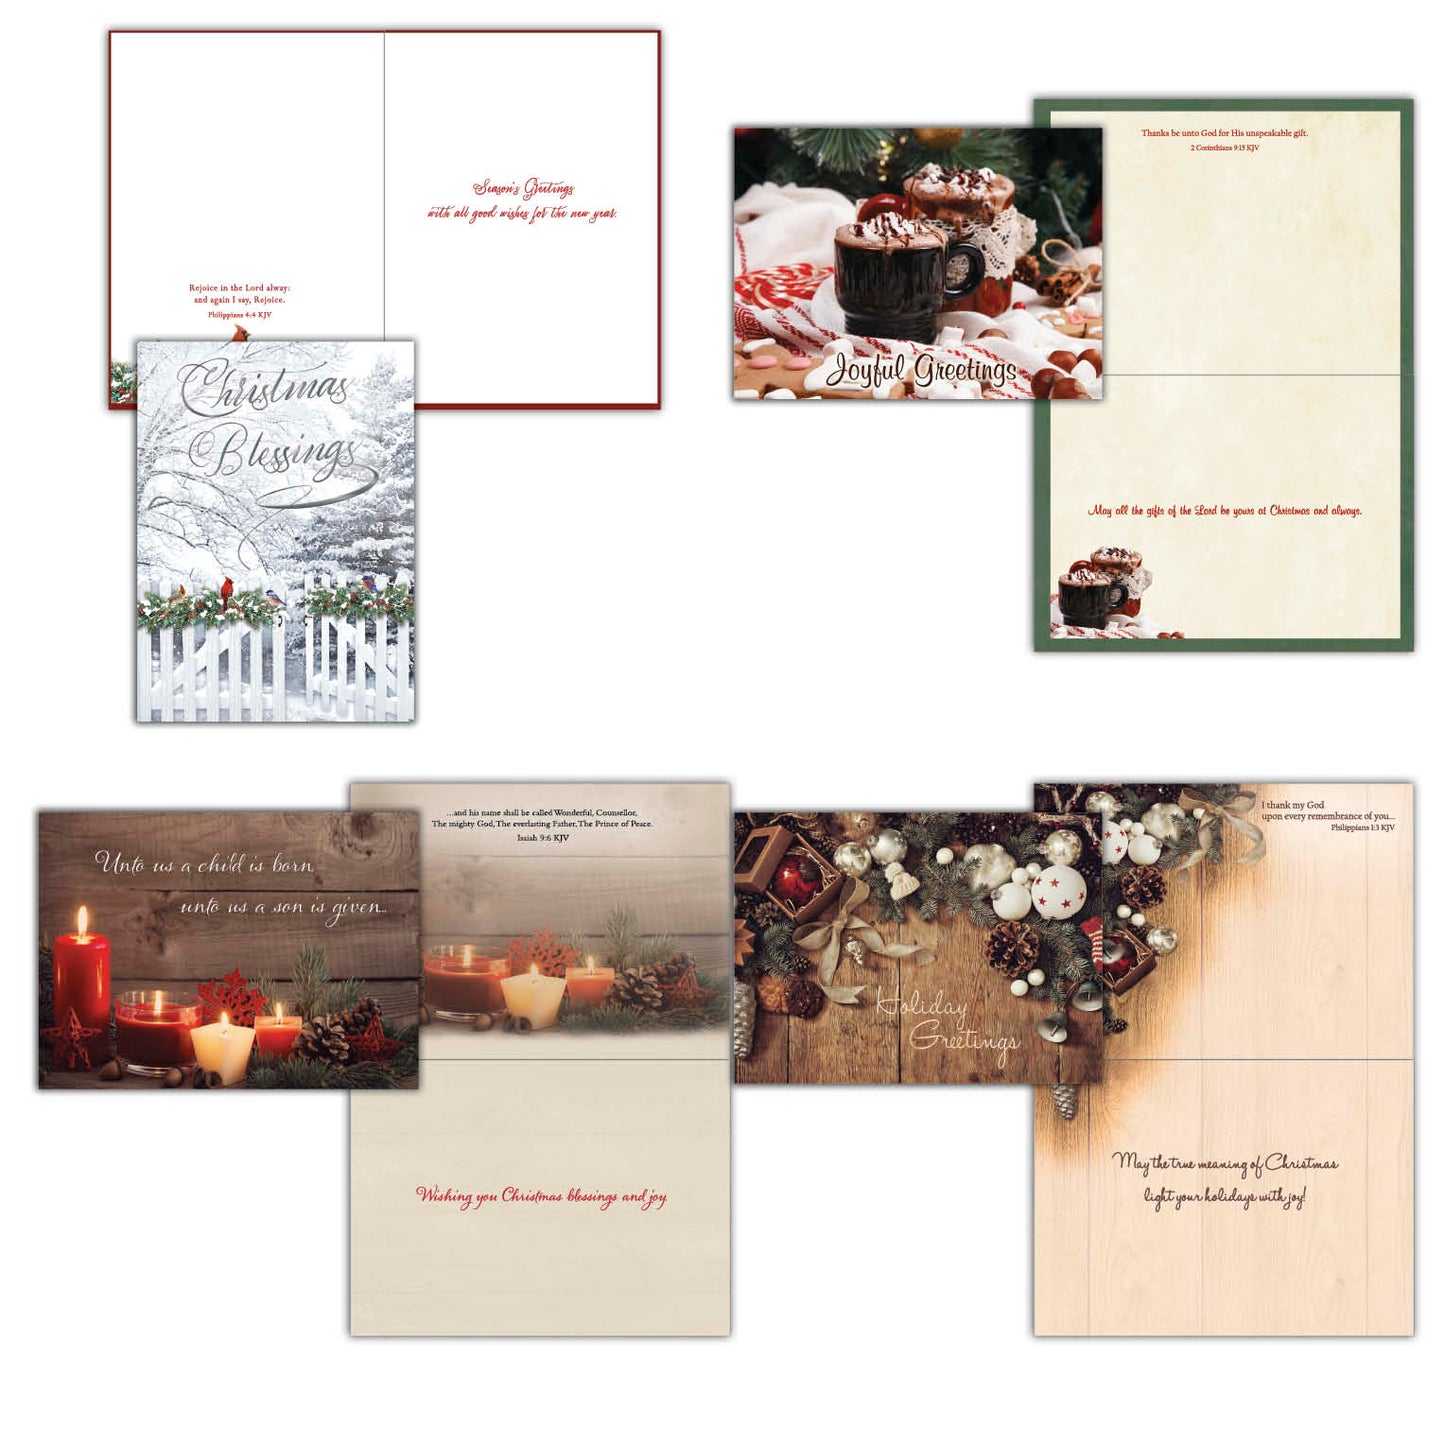 Extra Large Boxed Christmas Card Assortment - Christmas Greetings - 48 Cards and Envelopes